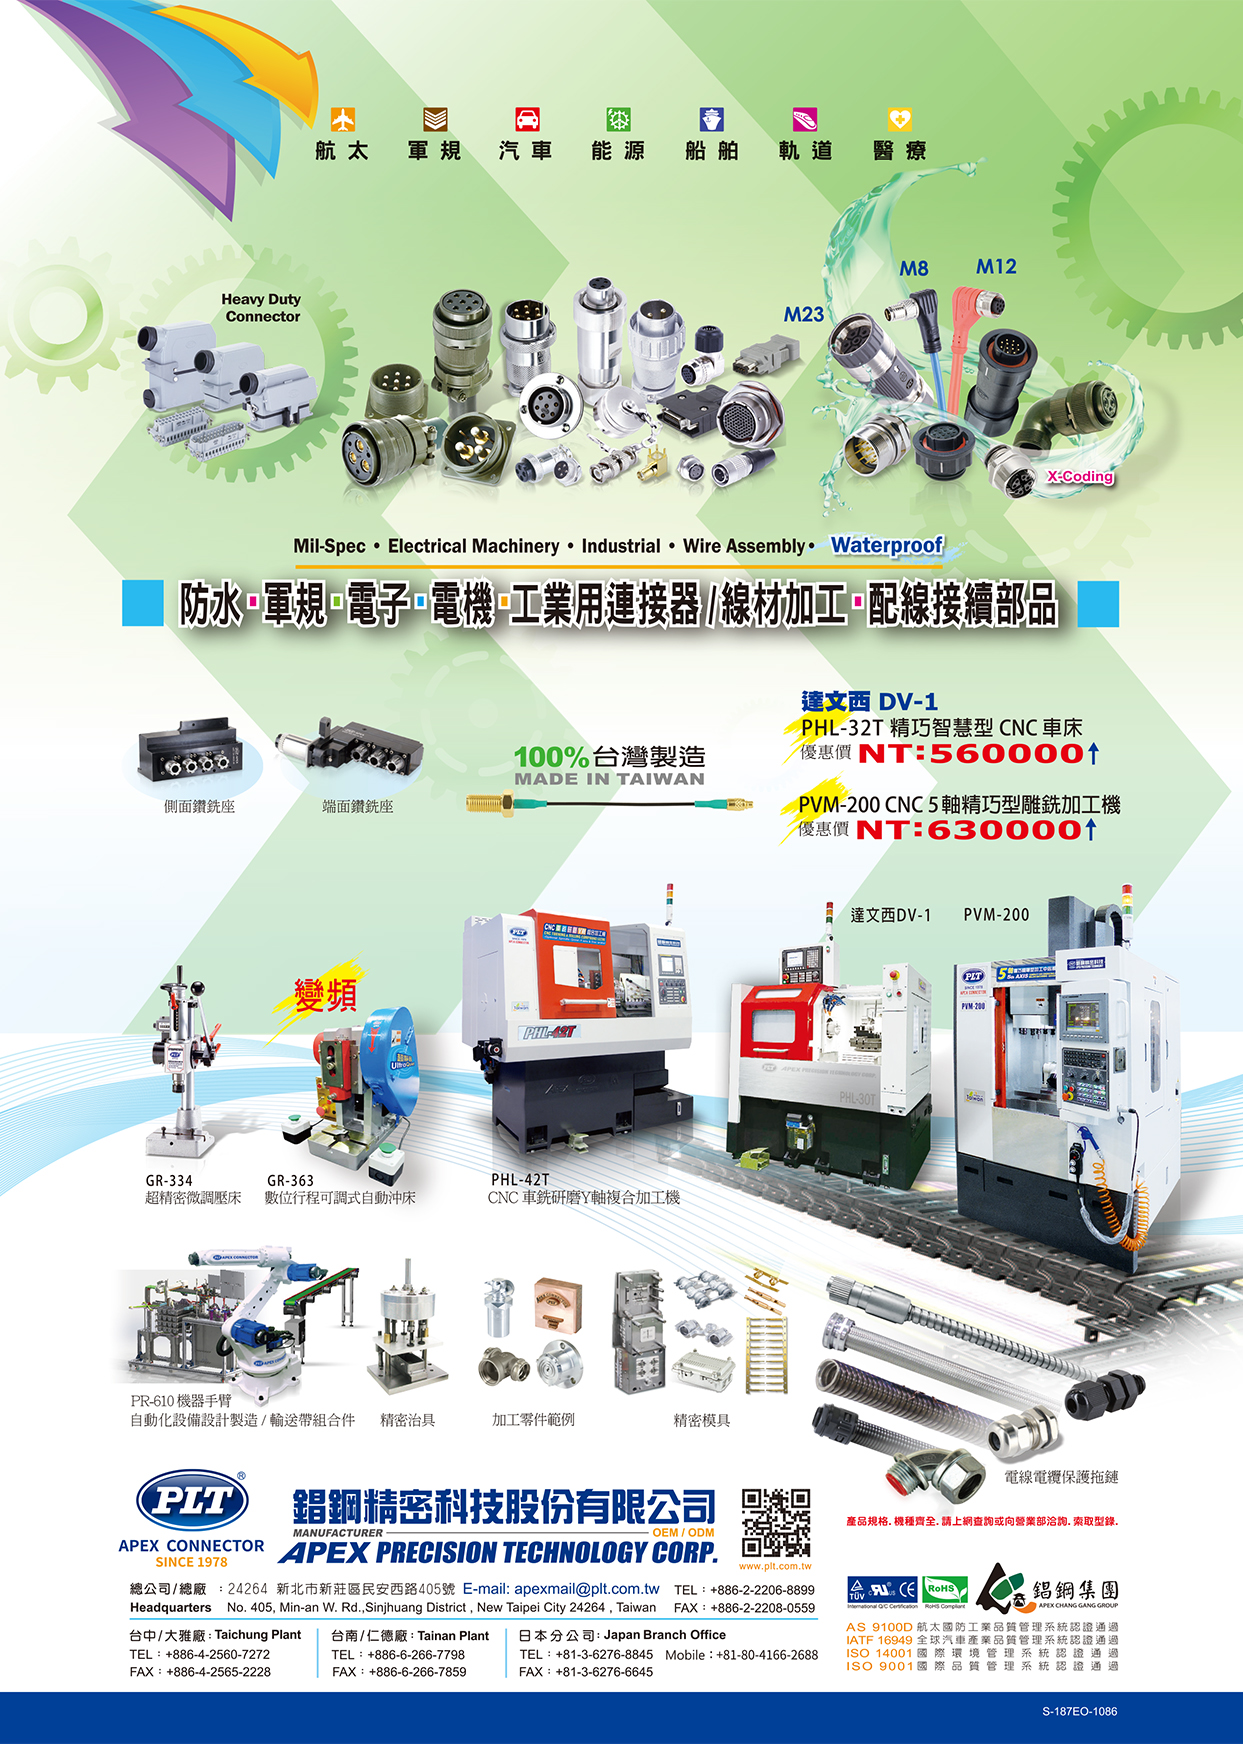 Who Makes Machinery in Taiwan (Chinese) APEX PRECISION TECHNOLOGY CORP.